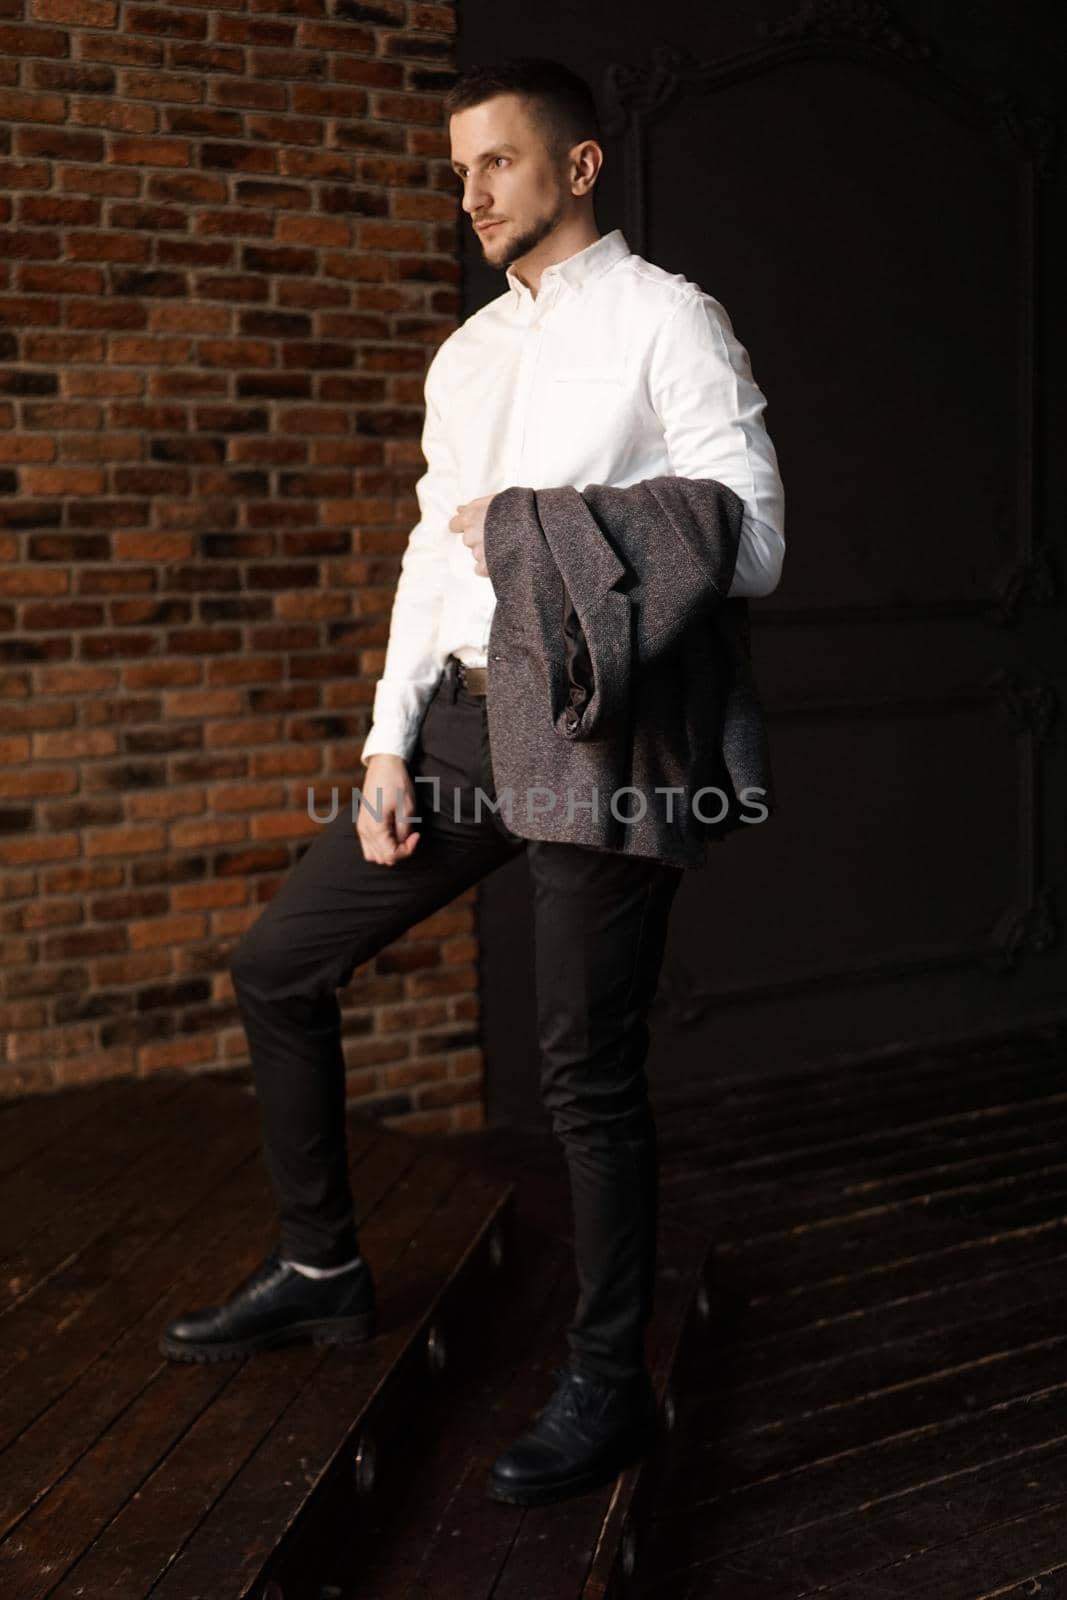 Stylish young businessman in white shirt is holding a jacket, standing against brick wall - Vertical photo